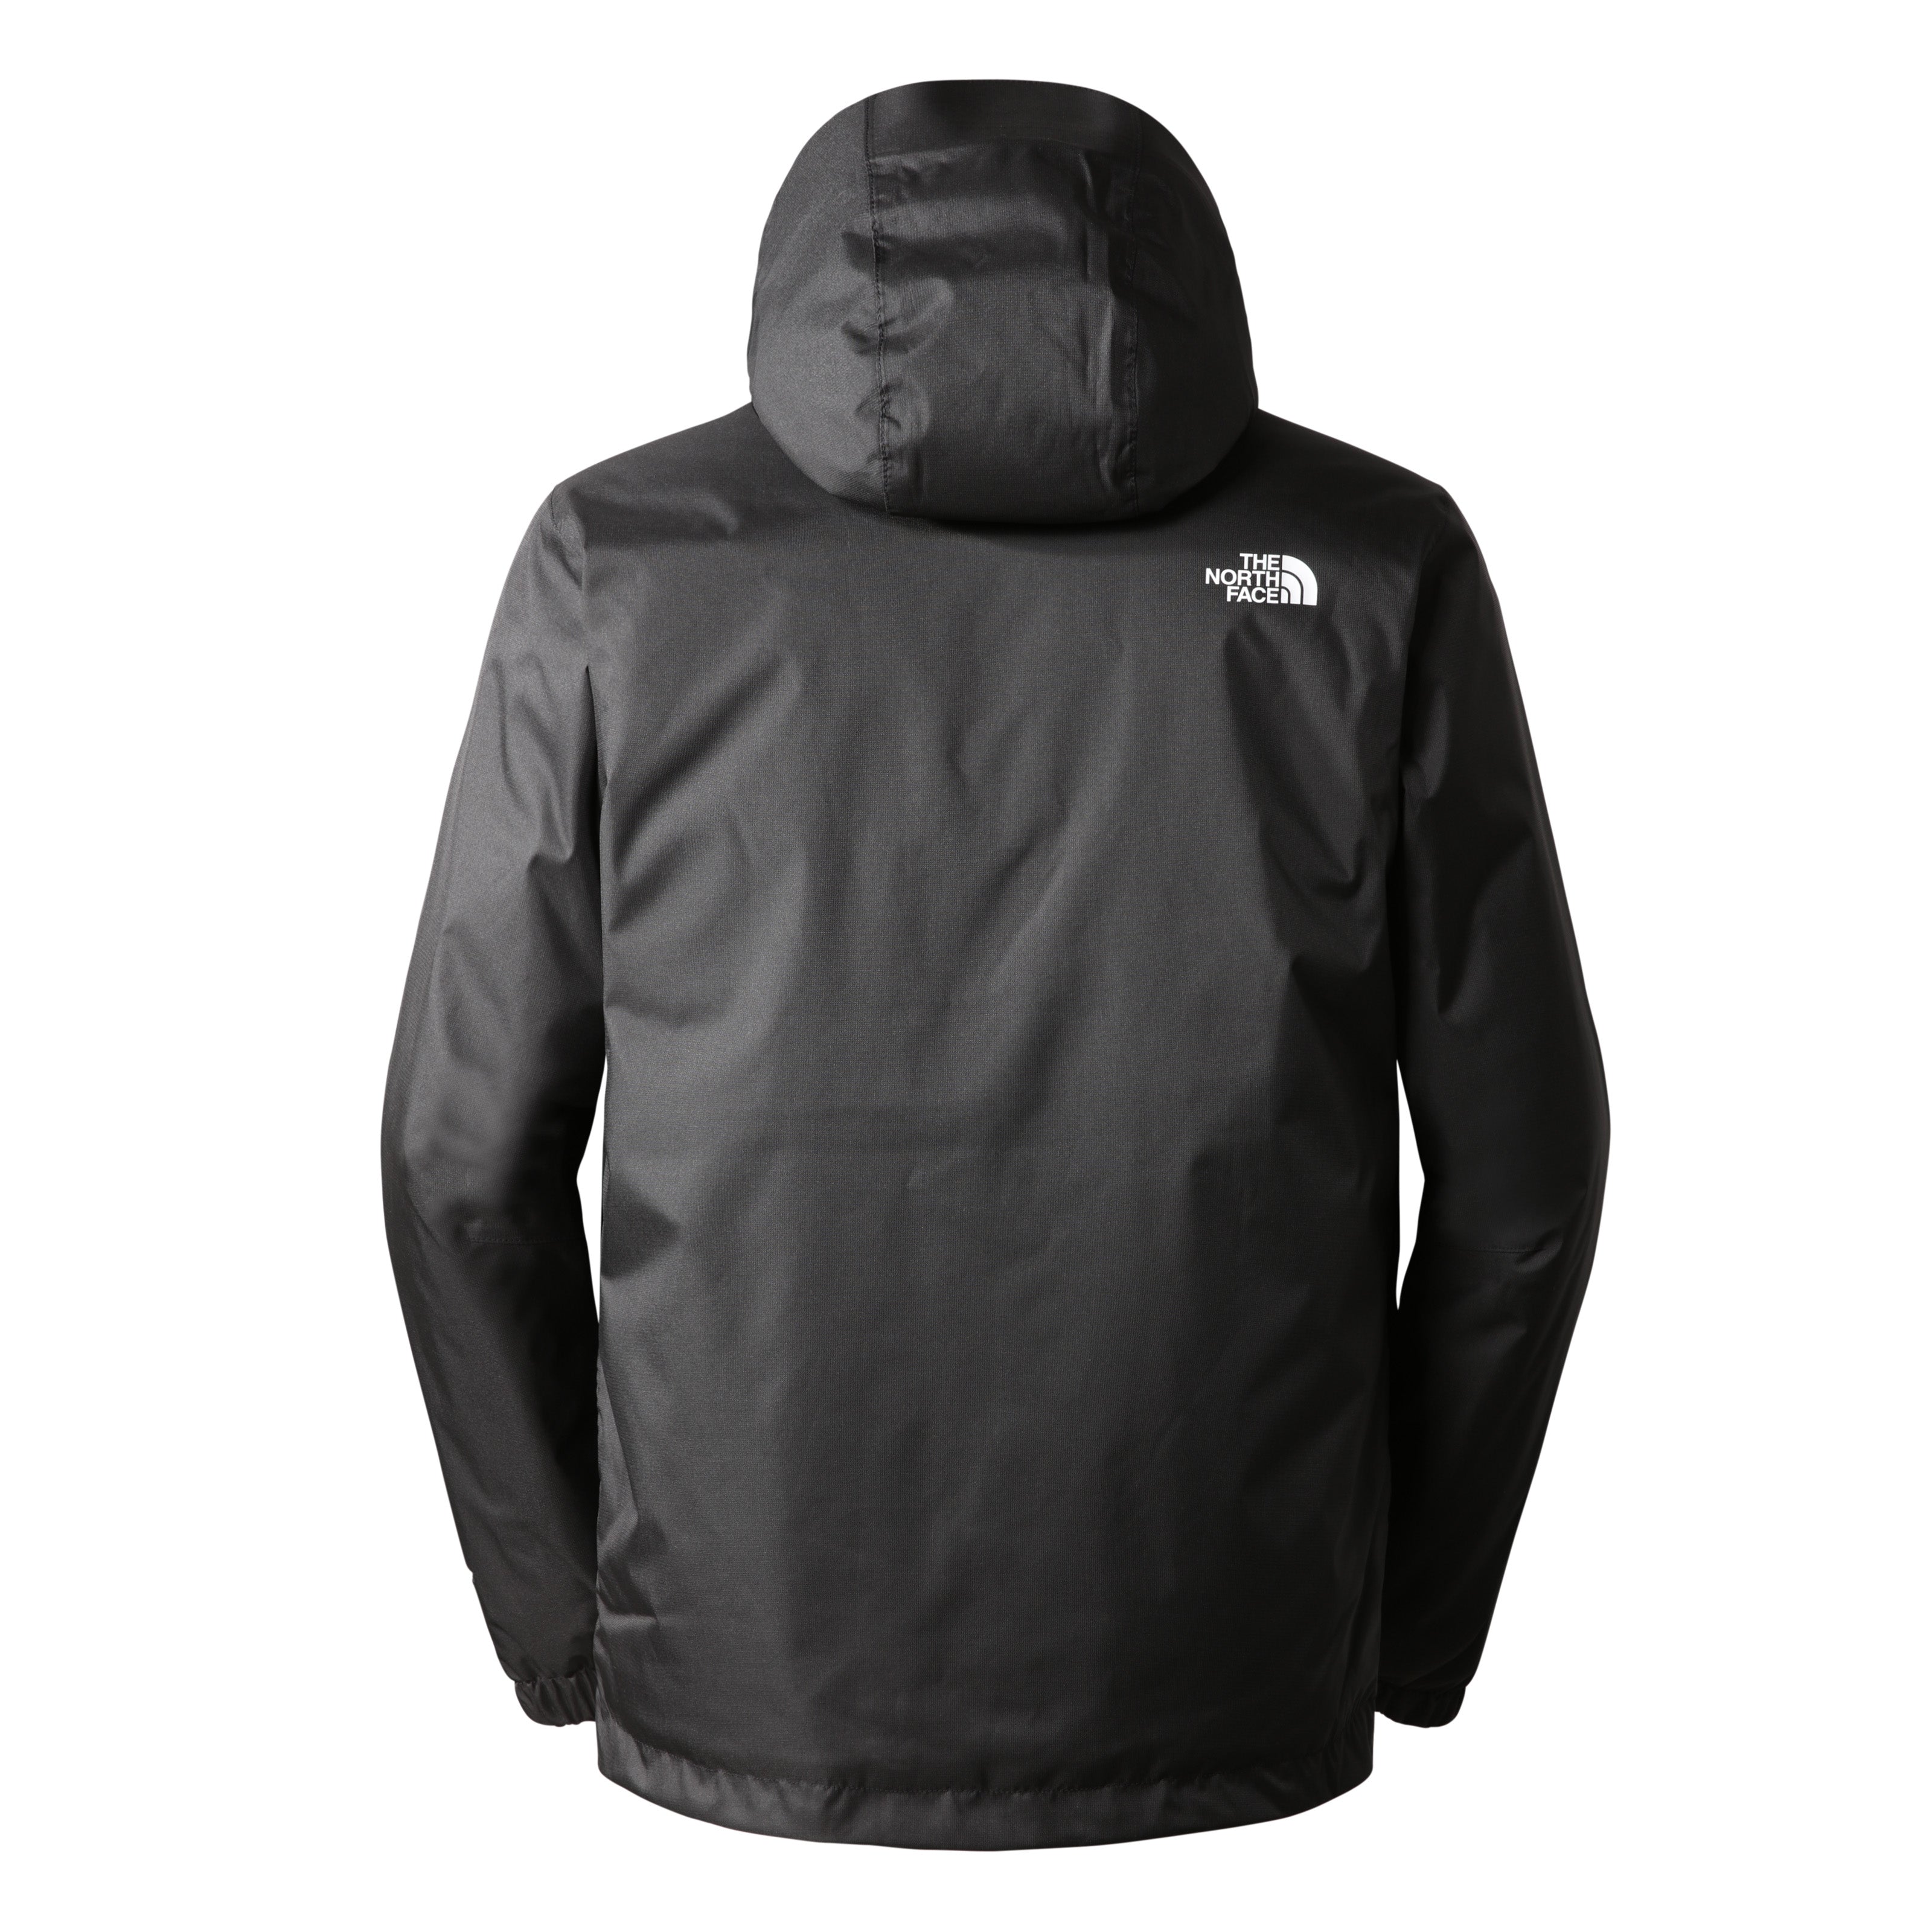 M QUEST INSULATED JACKET